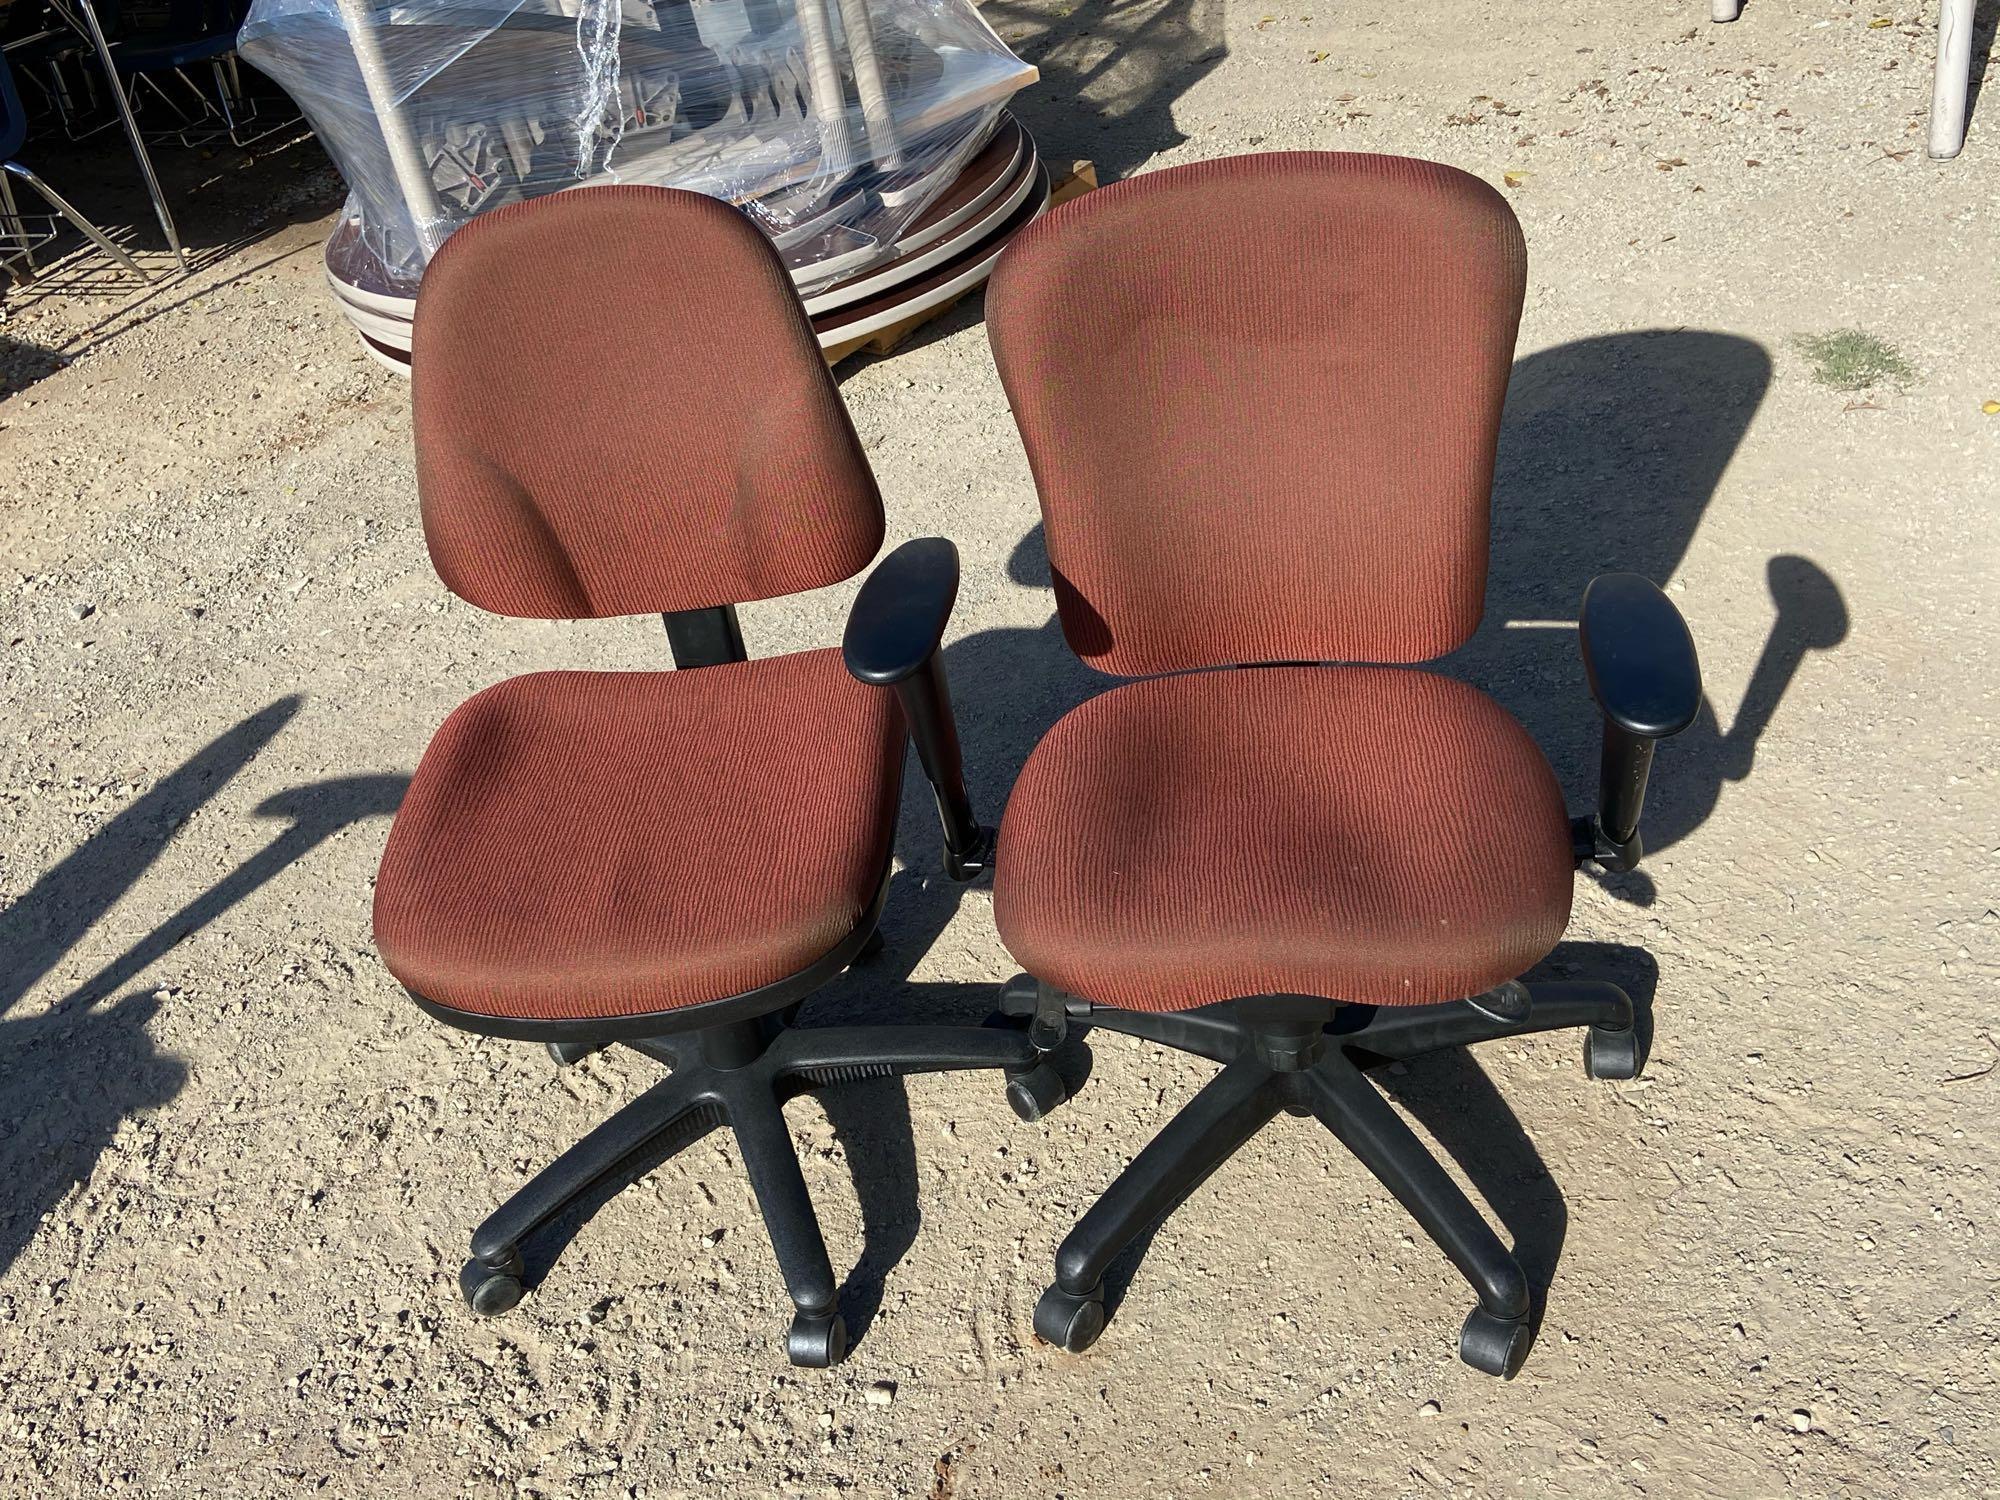 Four Matching Rolling Office Chairs - 4pcs